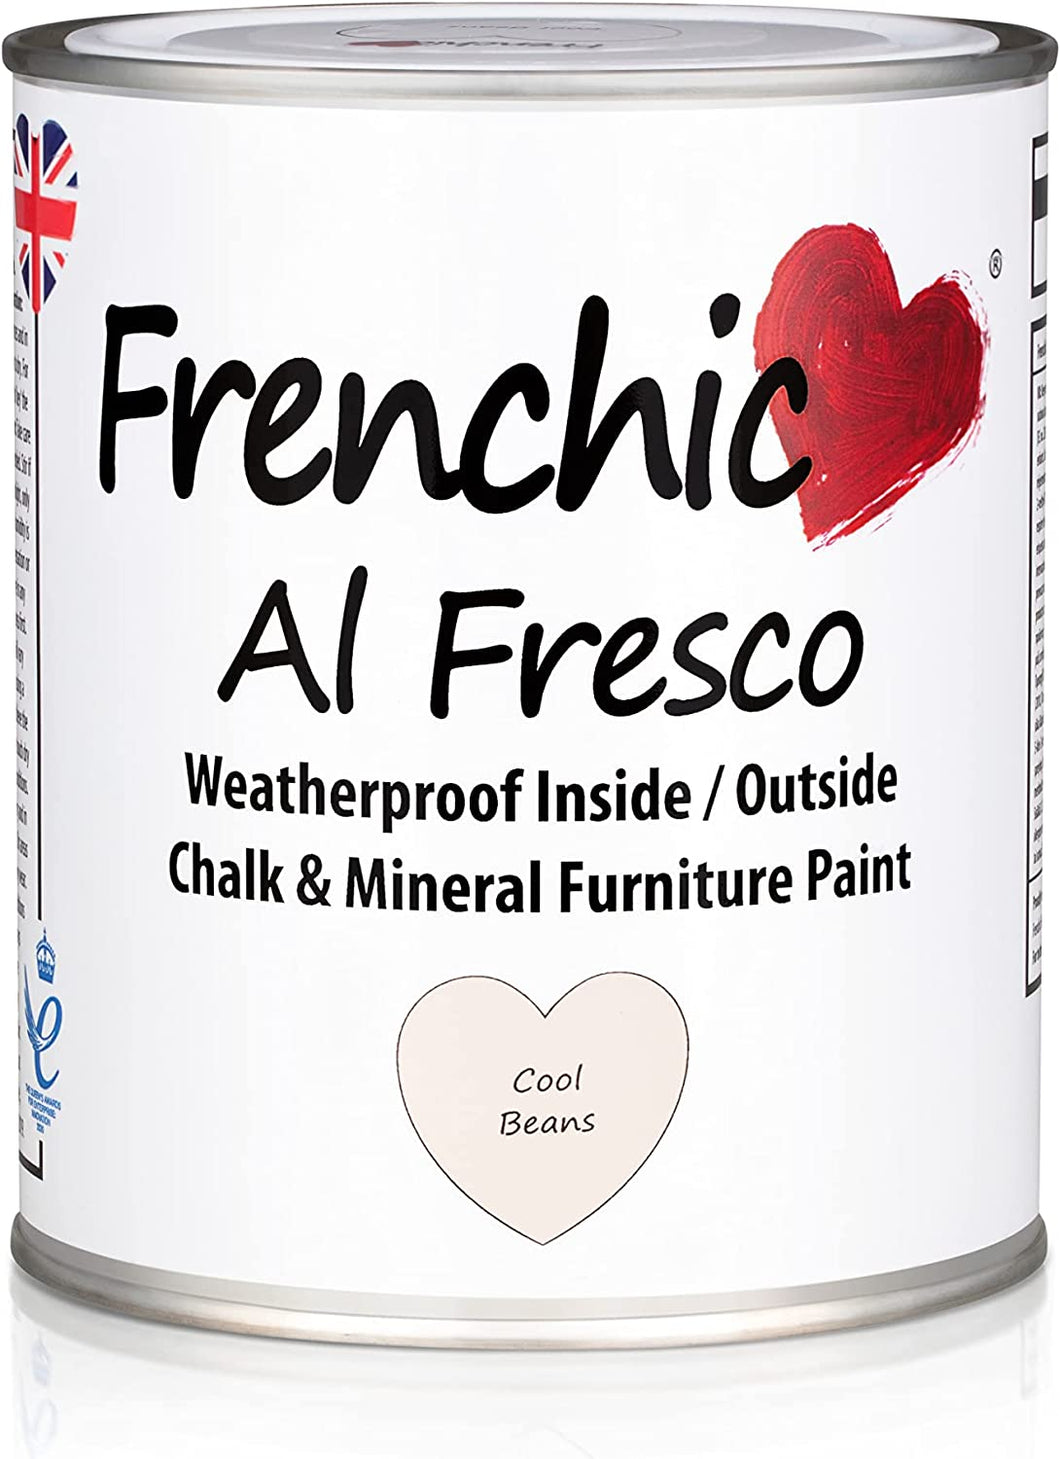 FRENCHIC Al Fresco, Cool Beans, Chalk & Mineral Furniture Paint, Weatherproof, For Inside/Outside 750ml